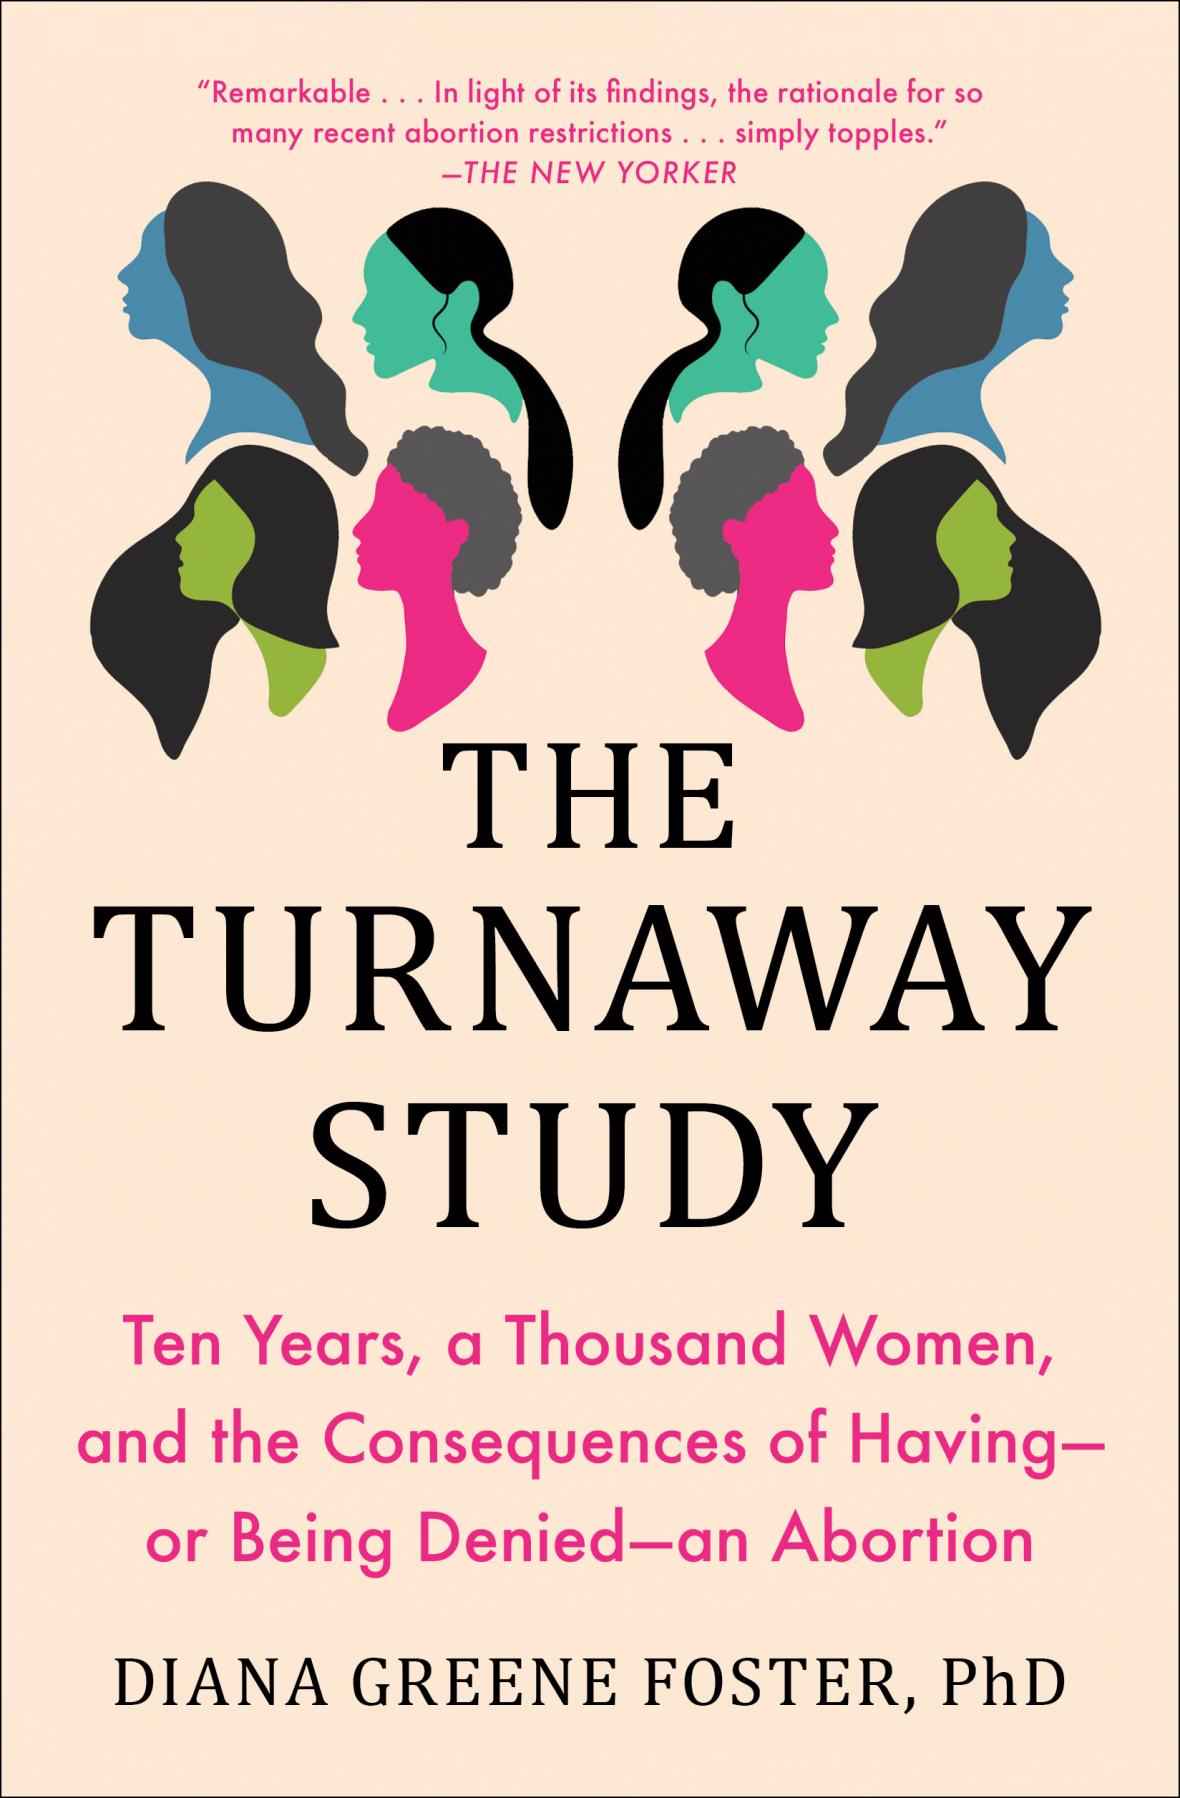 An image of the paperback cover of The Turnaway Study